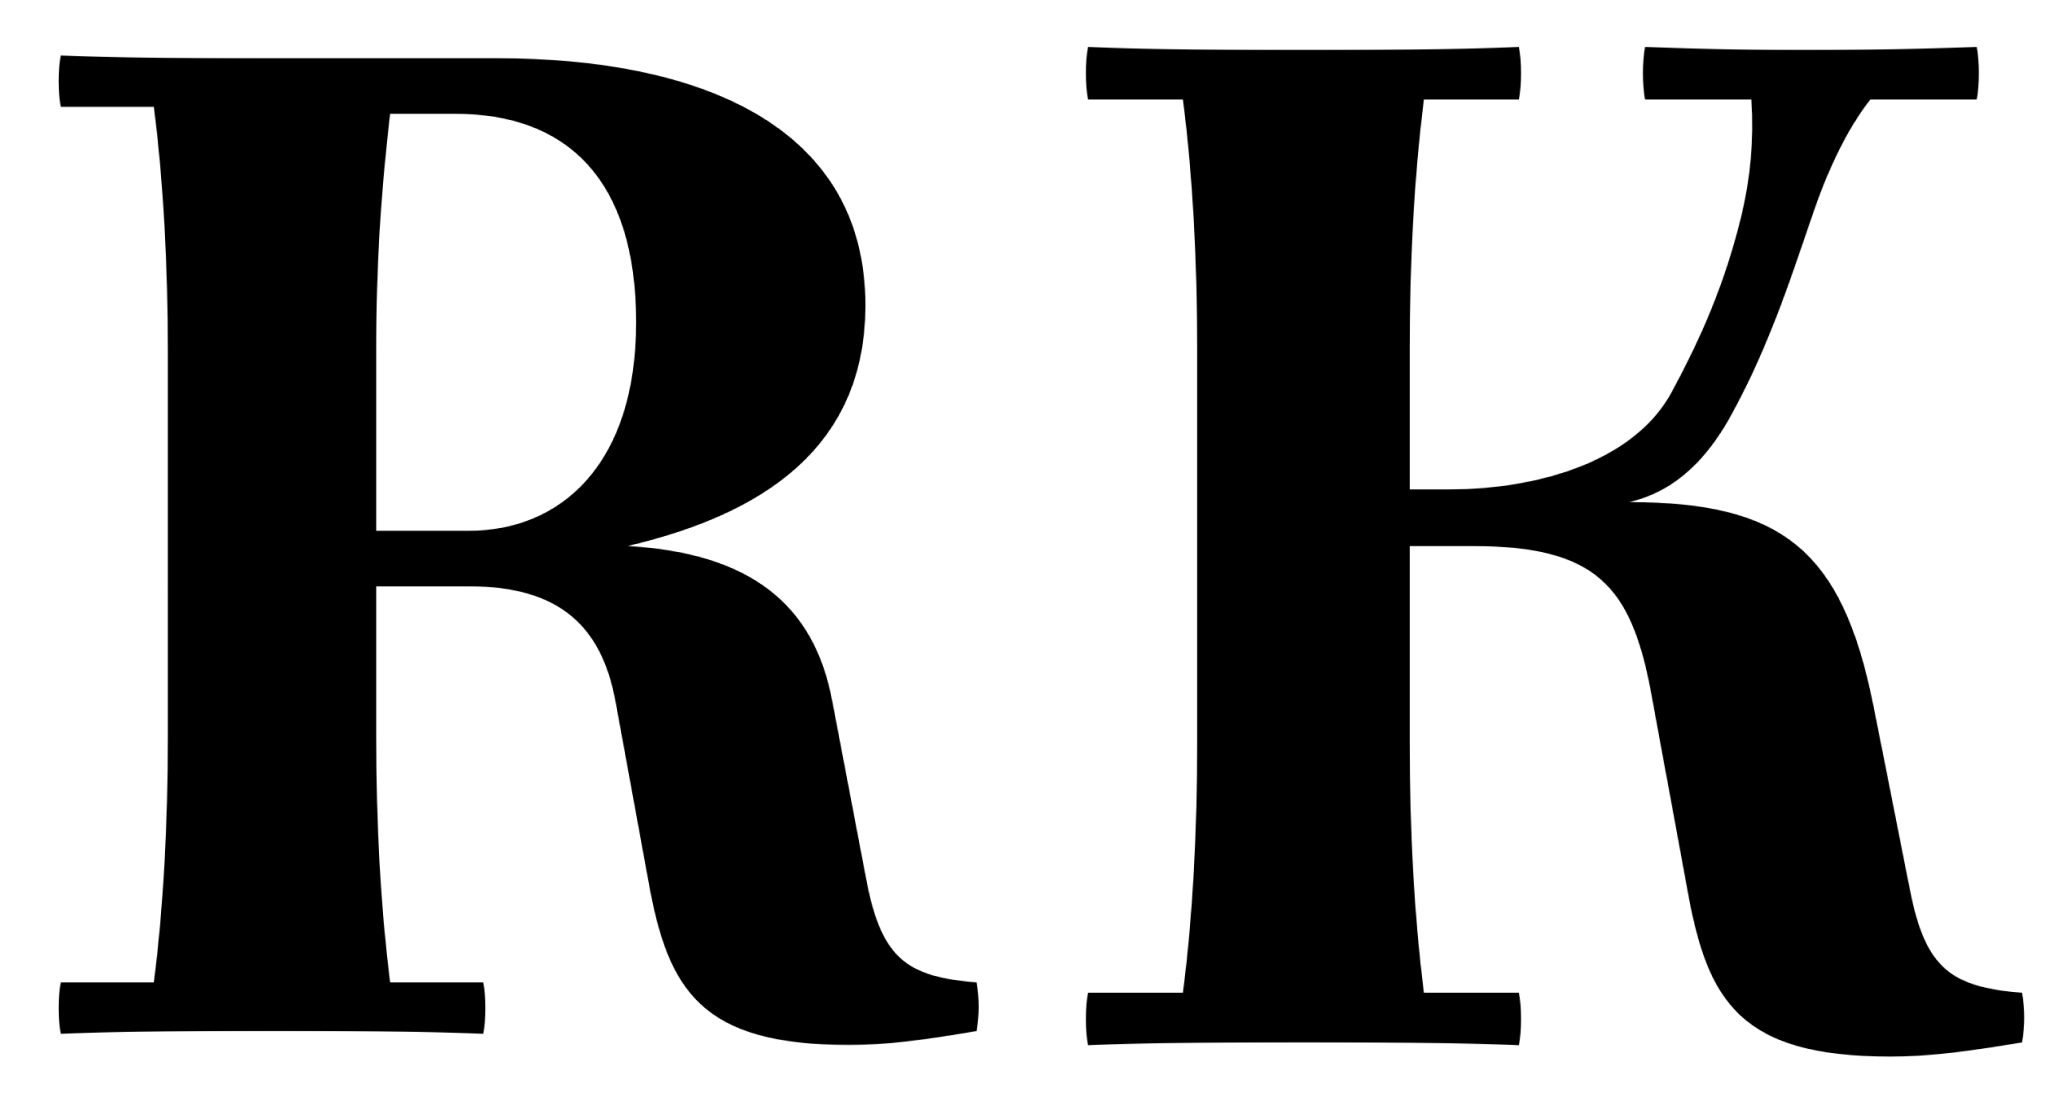 Serif capital R and K with curly legs